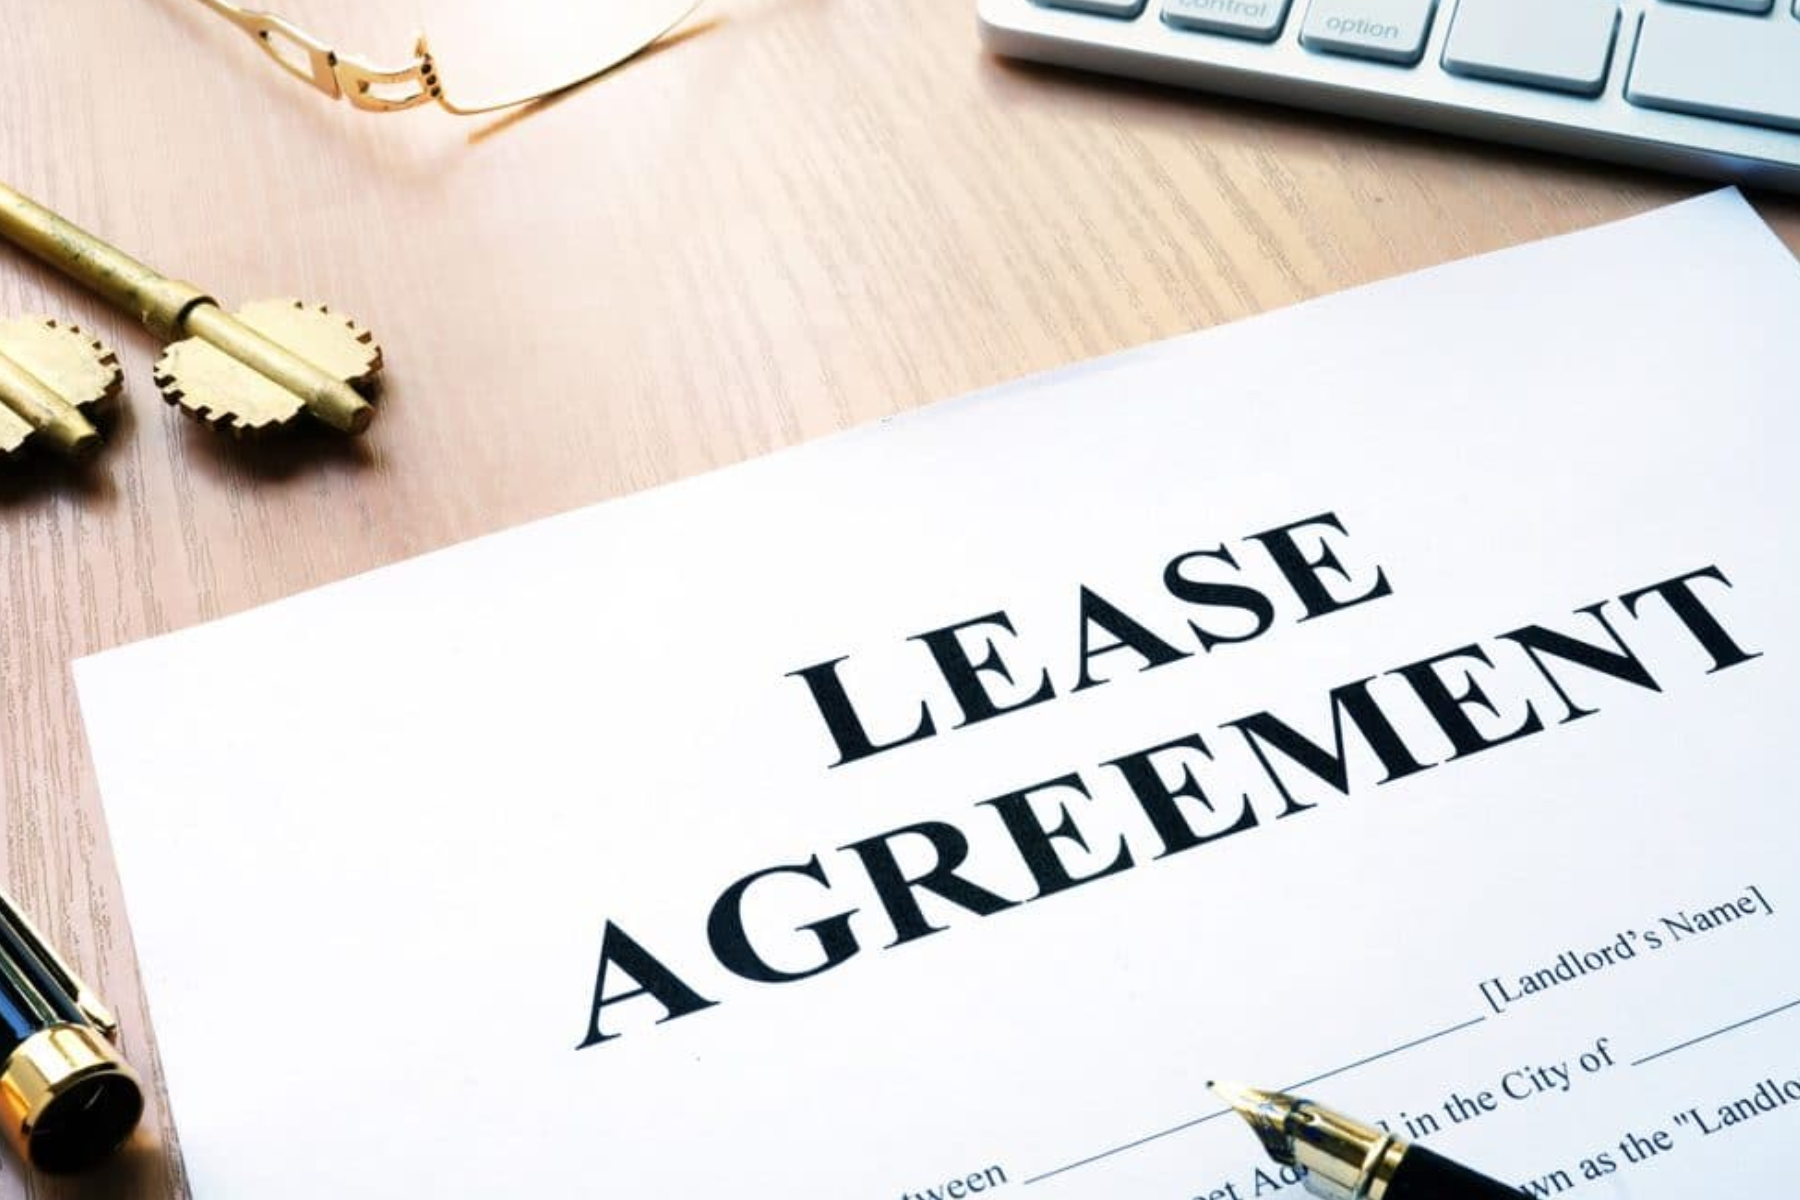 A Lease Agreement paper and the house key on a table